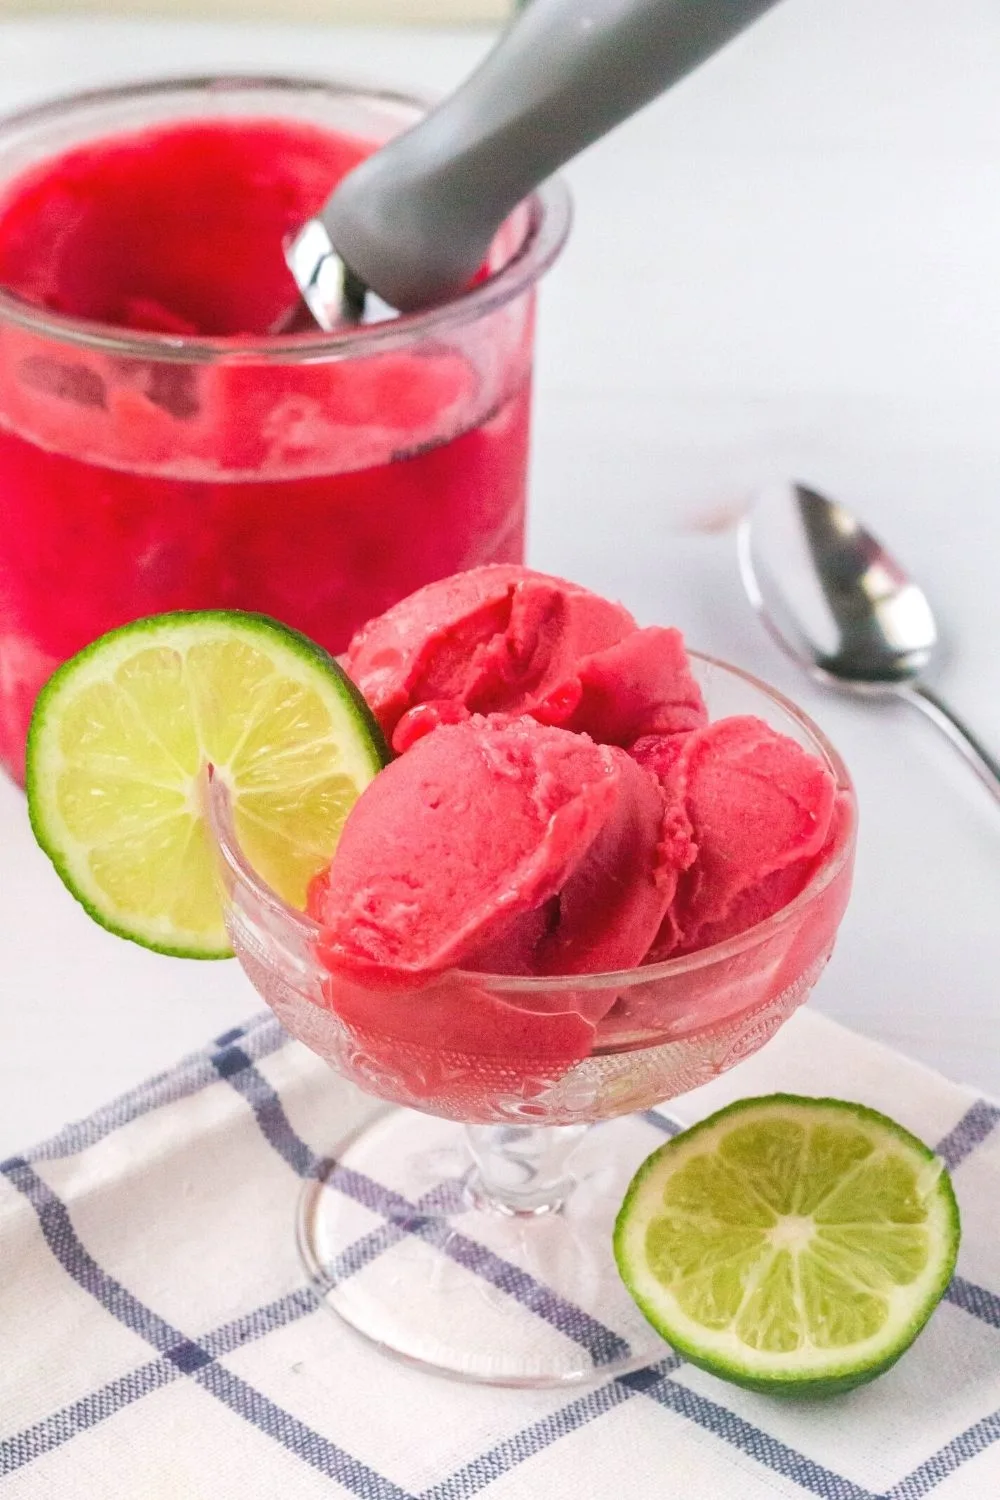 A glass dessert cup serving scoops of Ninja Creami cherry limeade sorbet is in the foreground; and a Ninja Creami pint of the remaining sorbet is in the background.